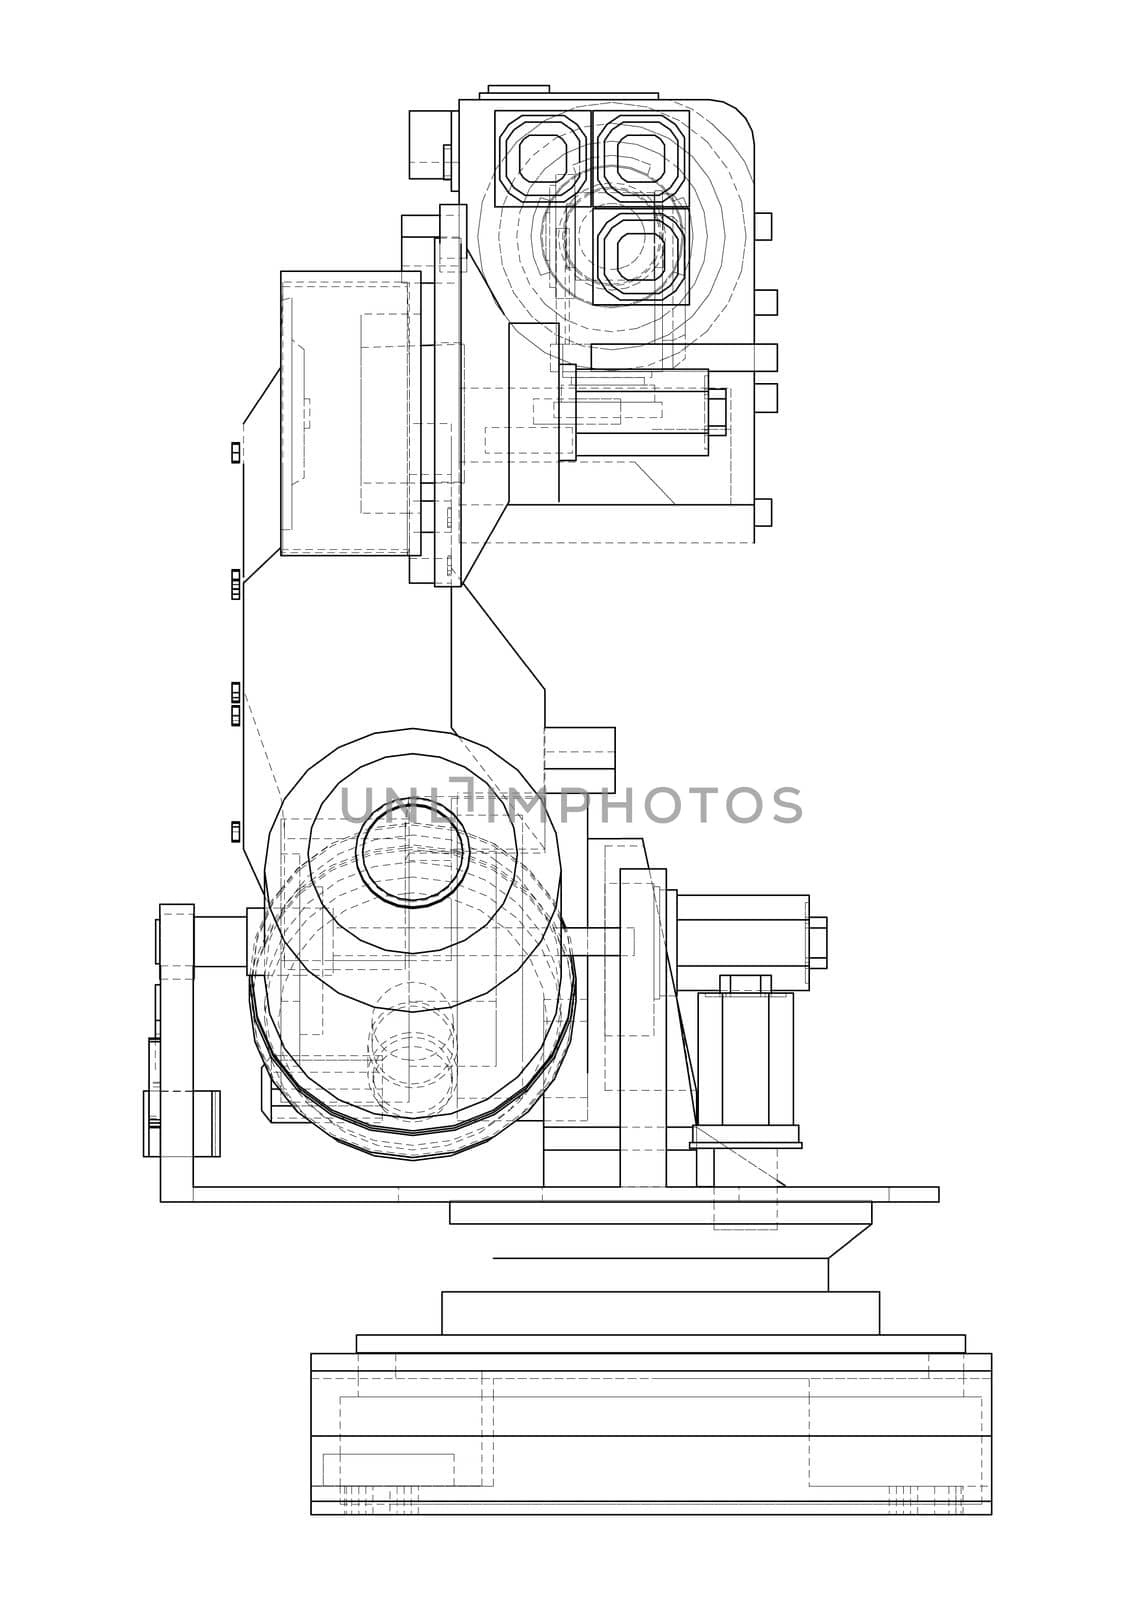 Industrial Robotic Arm. 3d illustration. Wire-frame style. Orthography